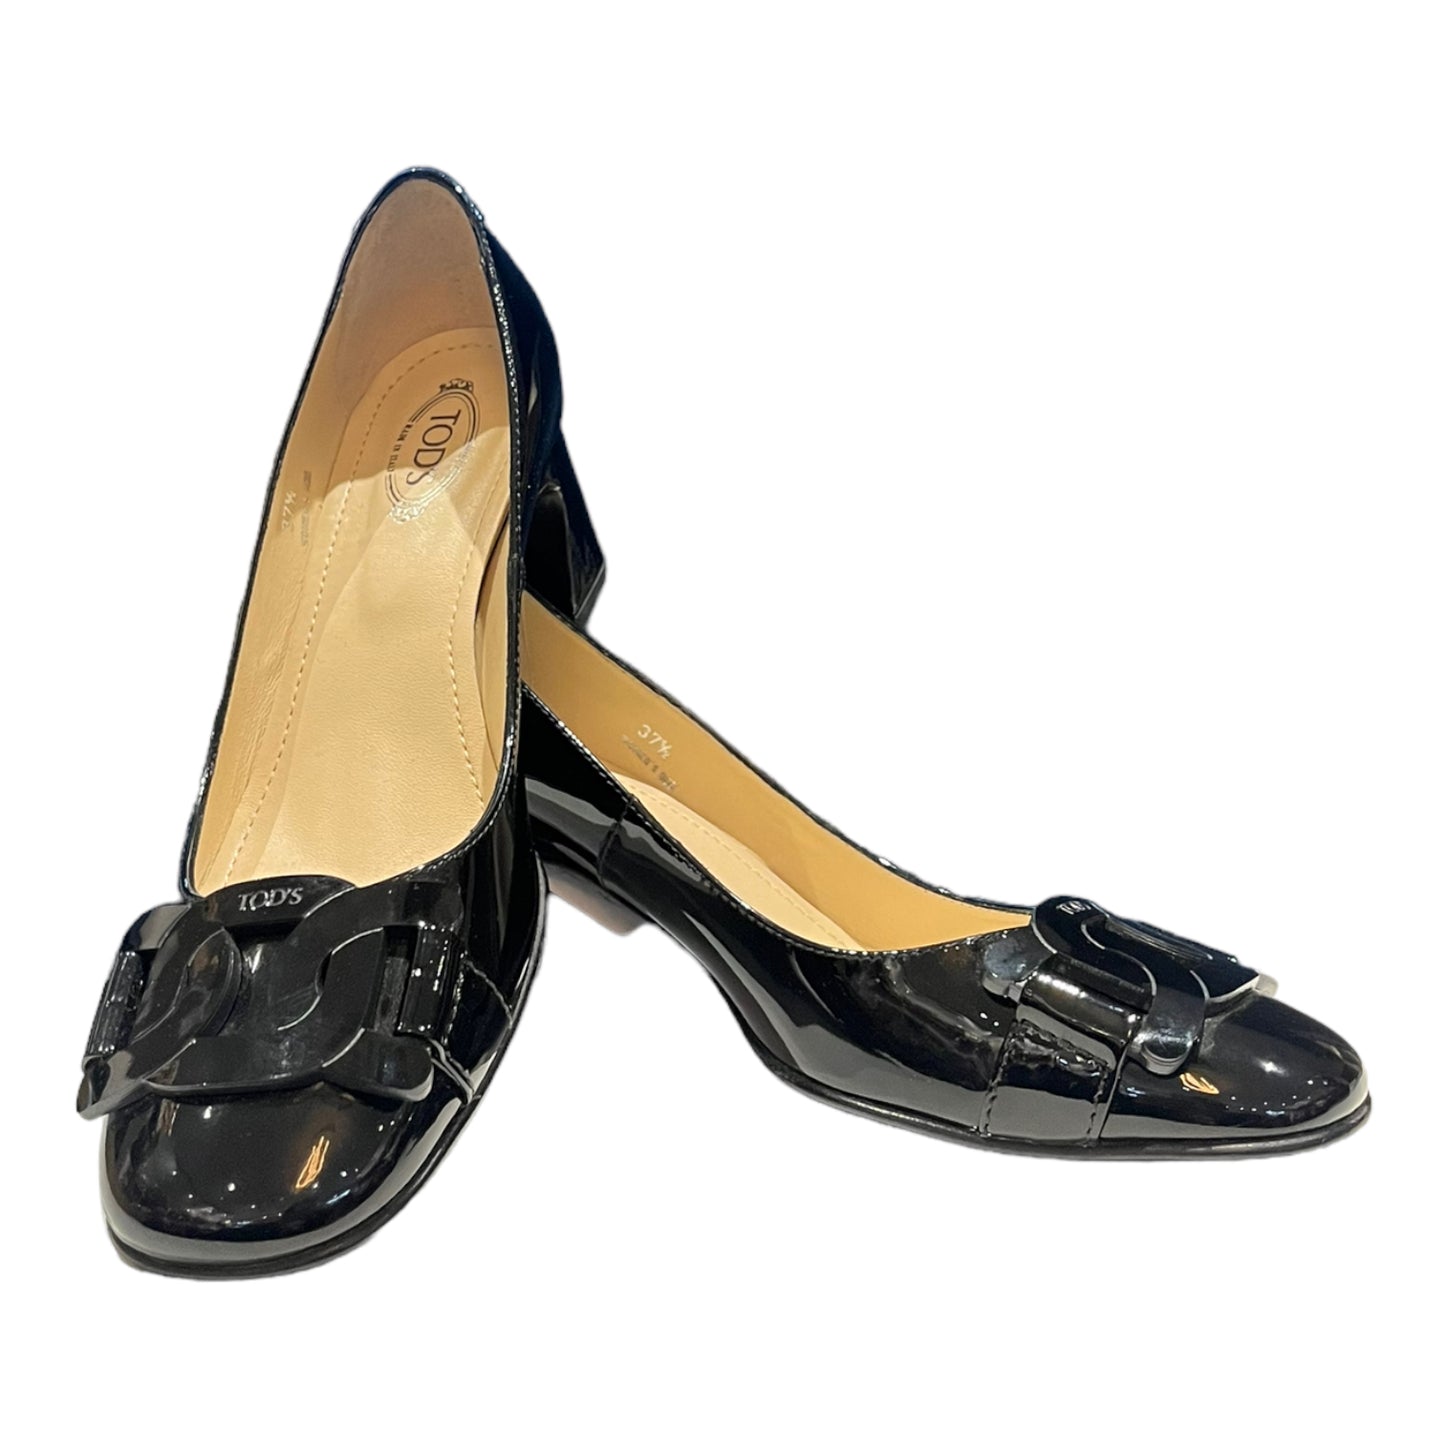 NEW Tod's Black Patent Loafer Heels